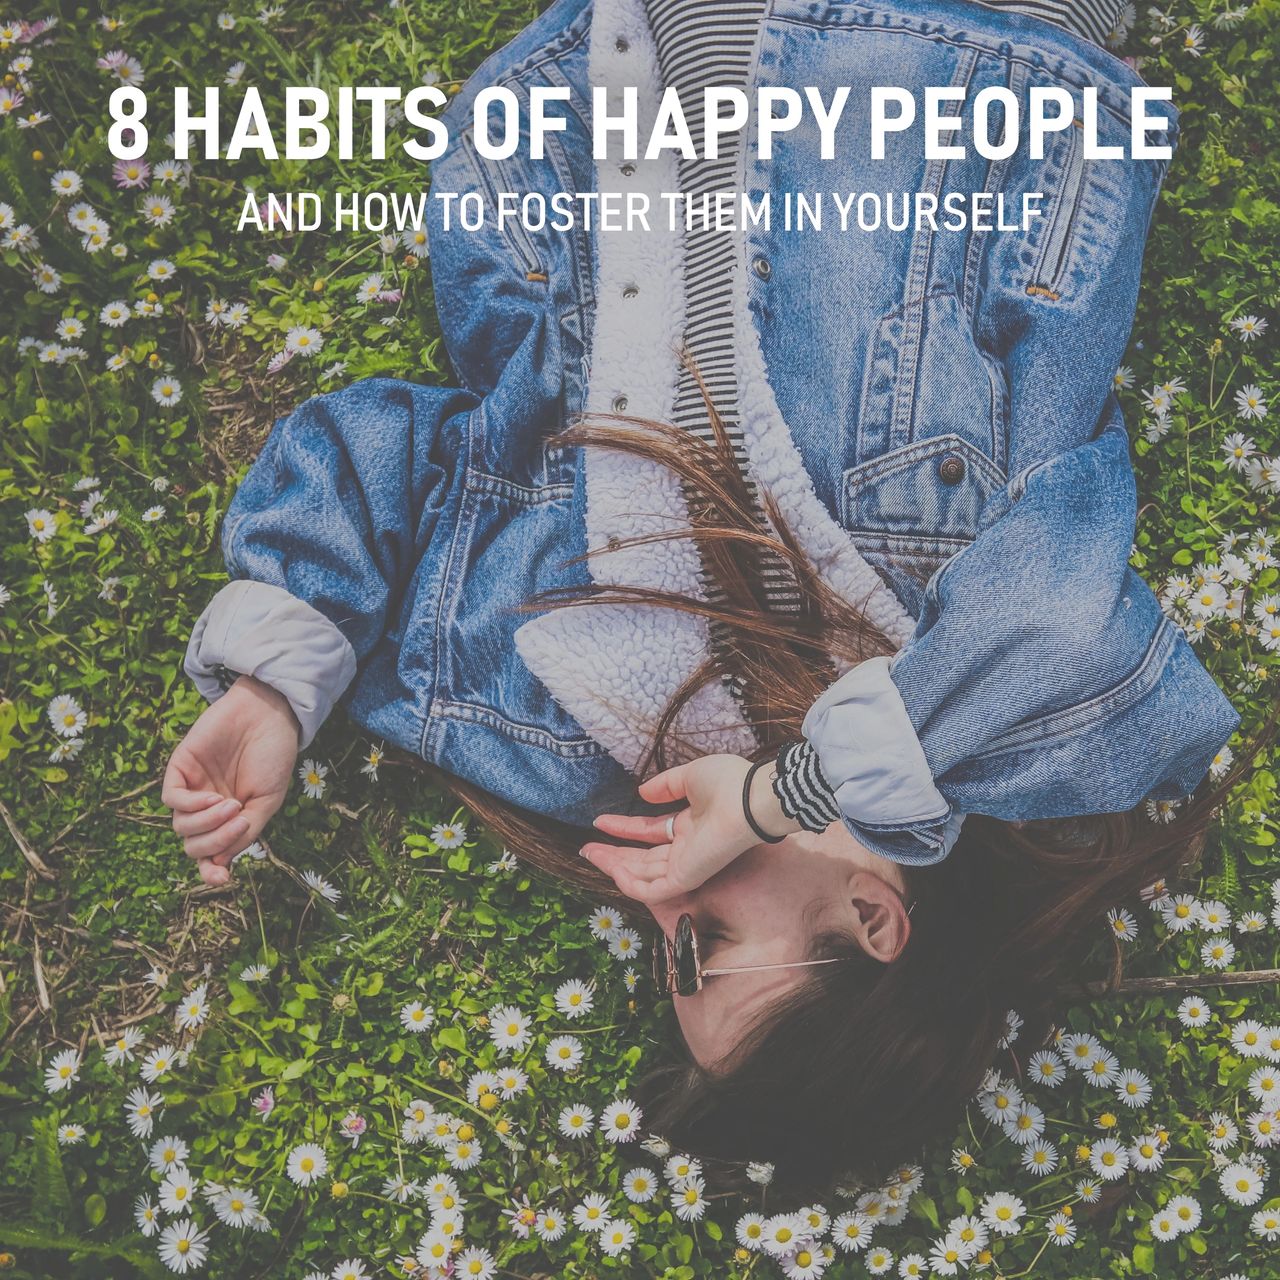 8 Habits of Happy People and How to Foster Them in Yourself